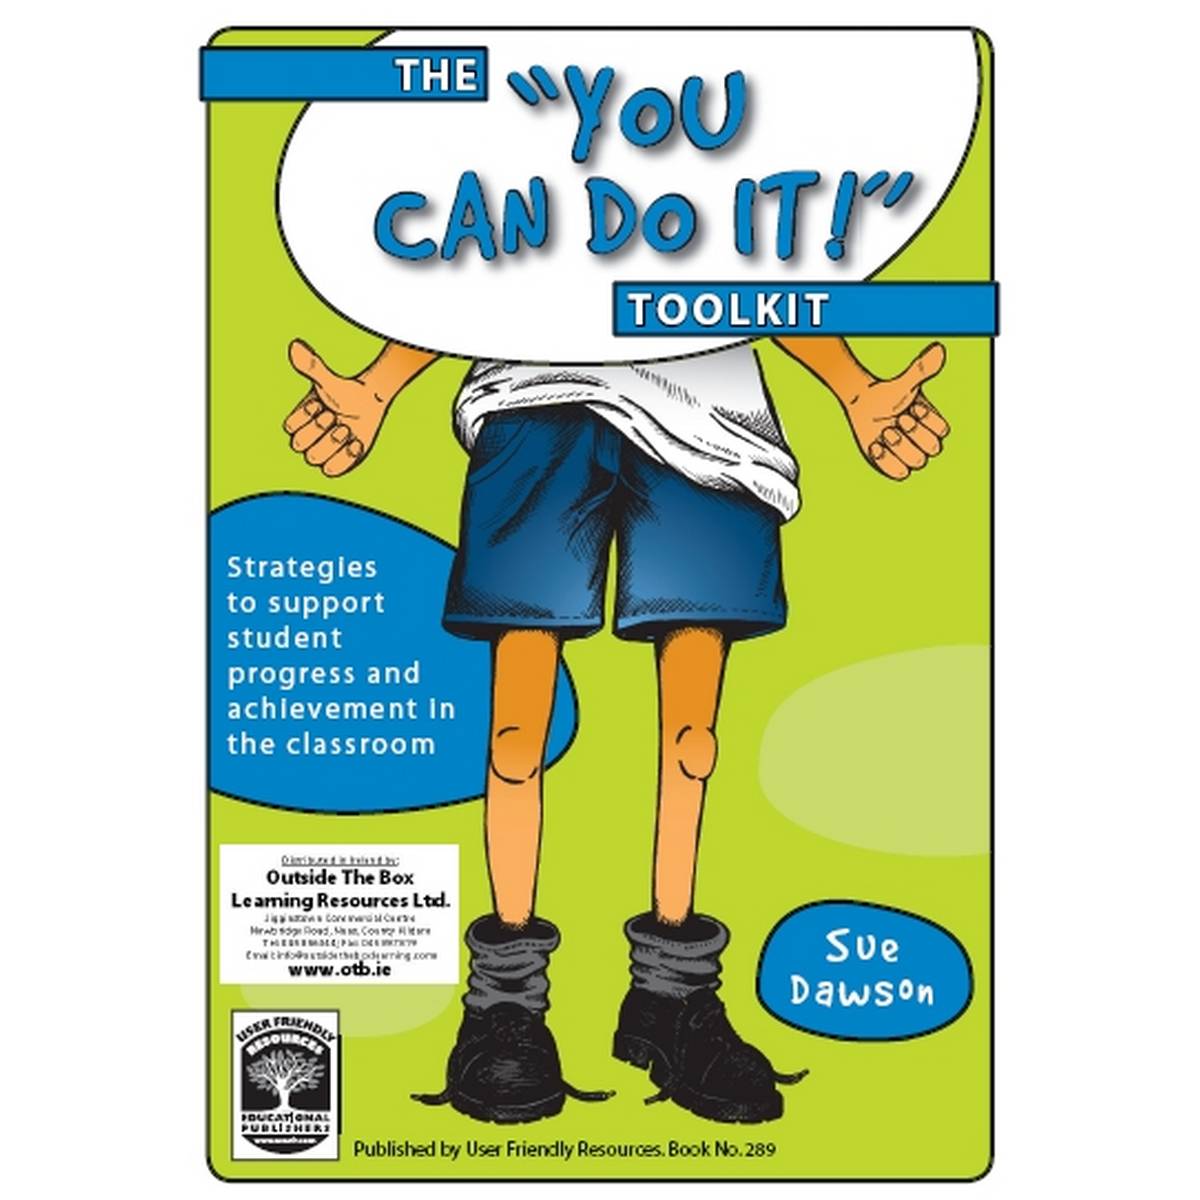 You Can Do It! Toolkit: Strategies to Support Student Progress and Achievement in the Classroom